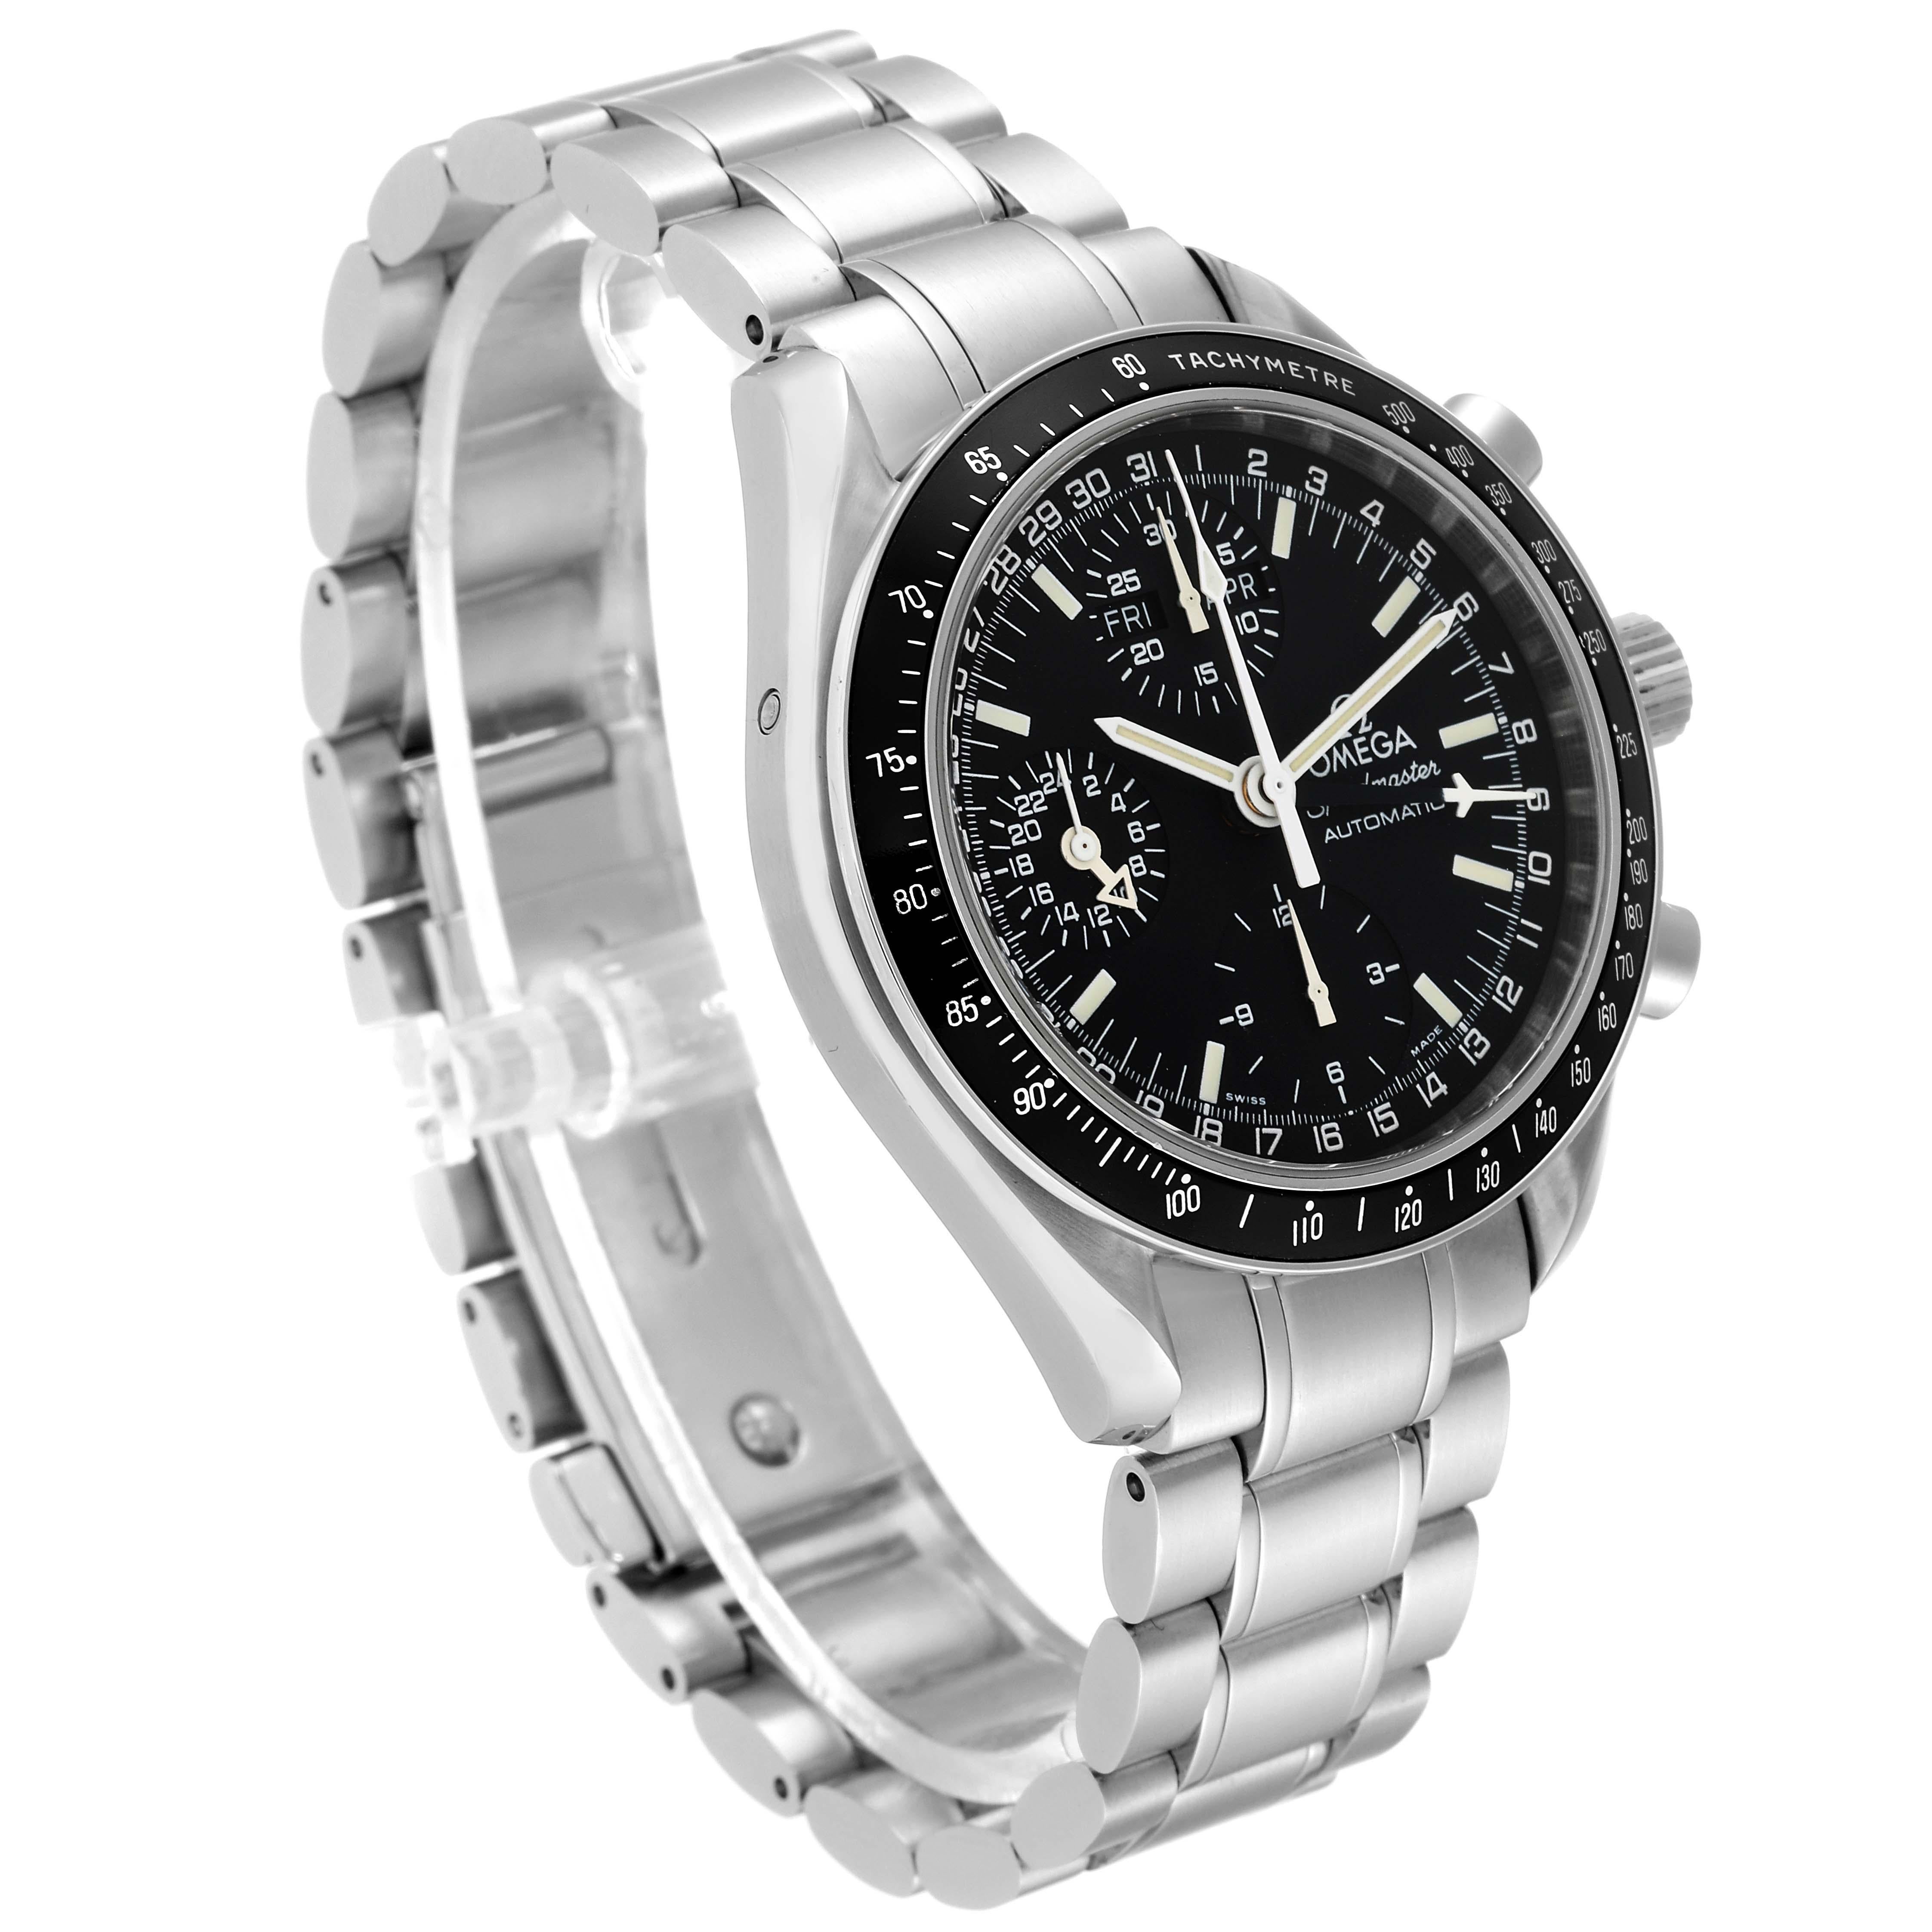 Omega Speedmaster Day Date Black Dial Automatic Mens Watch 3520.50.00 Box Card 6